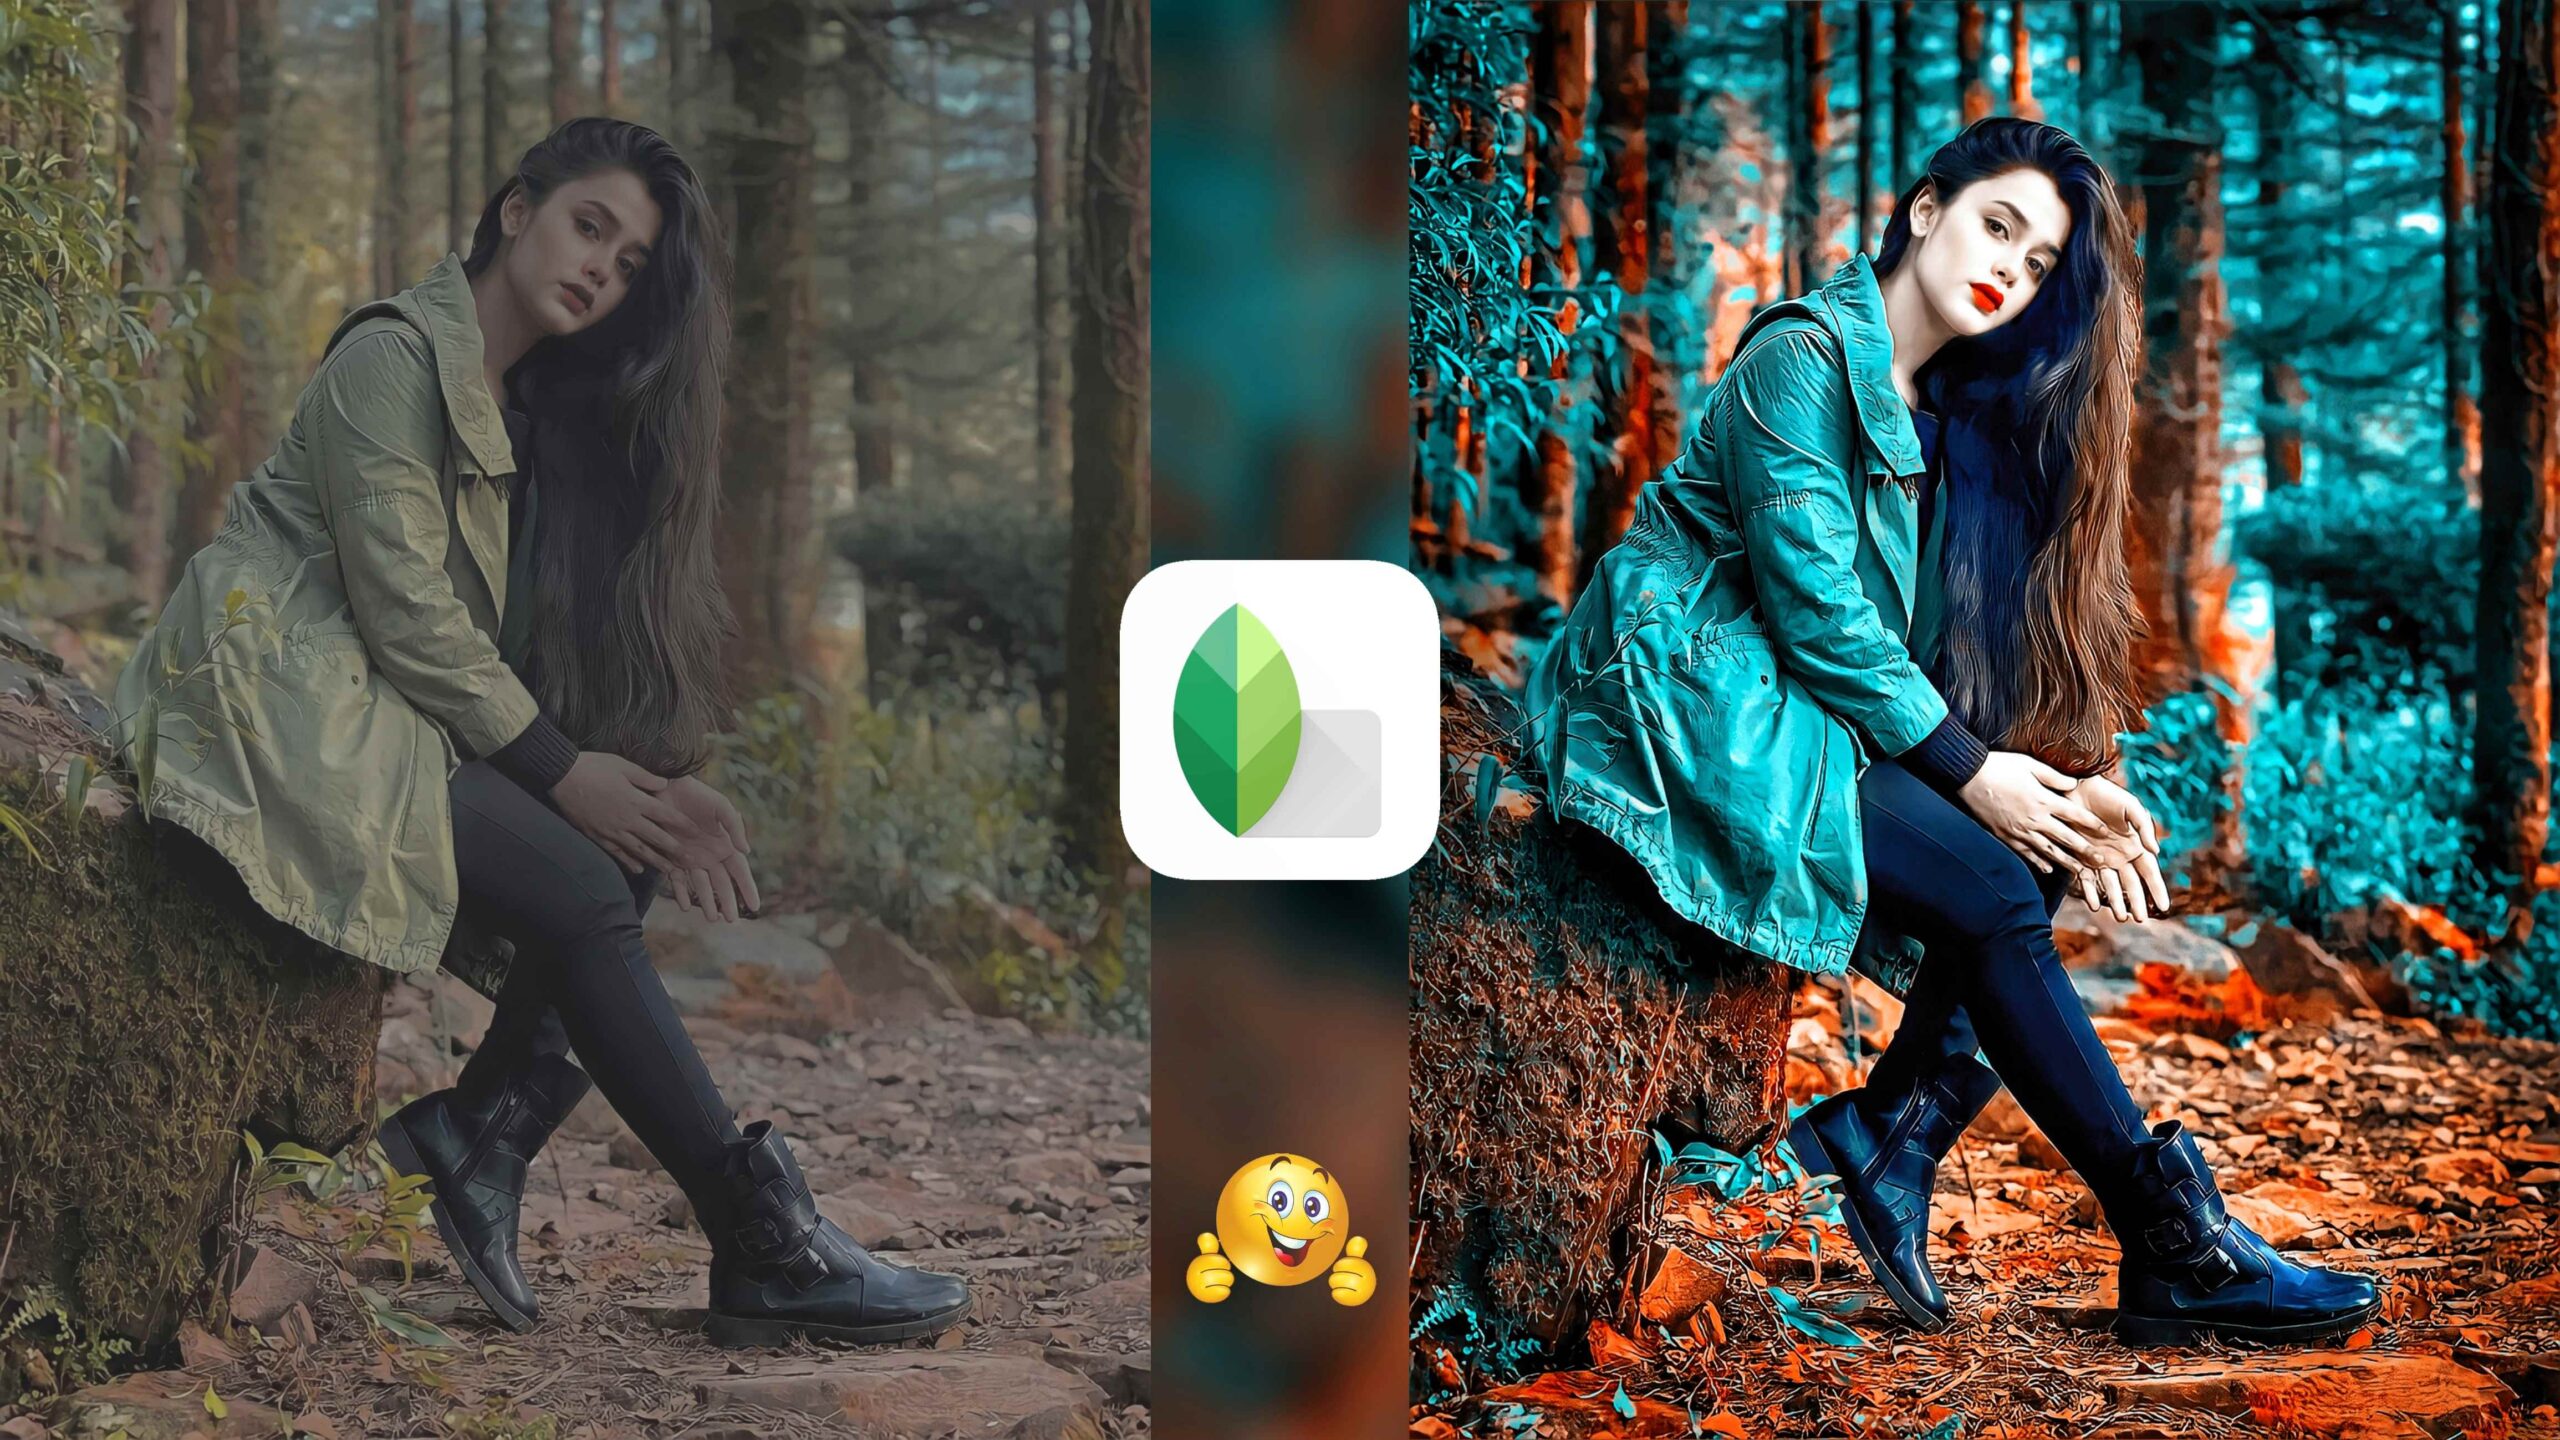 Snapseed New Color Effect Photo Editing Tricks ðŸ”¥